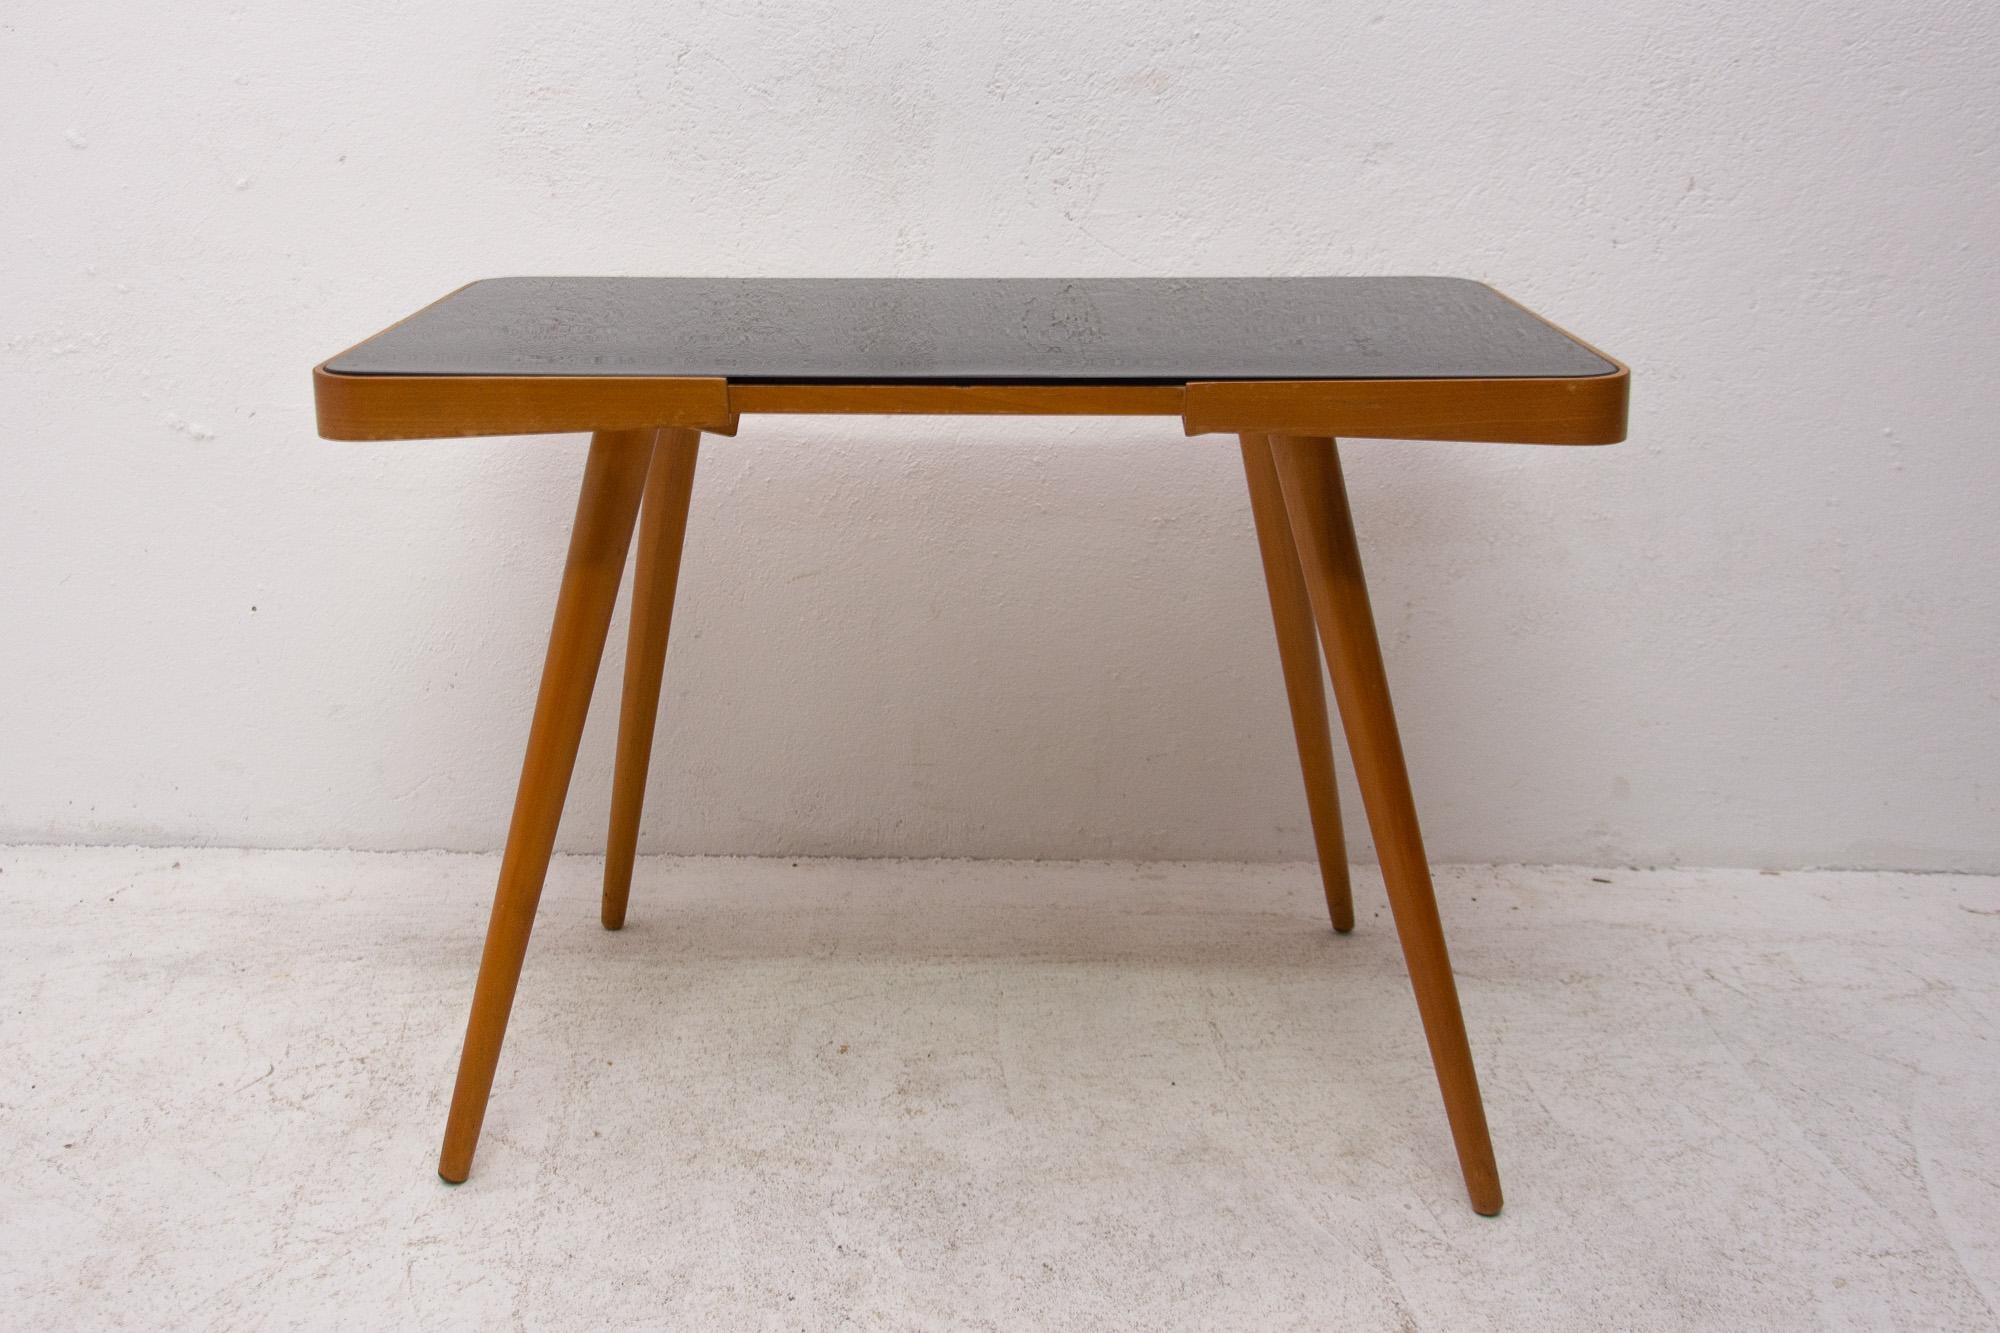 Midcentury opaxite glass coffee table from the 1960s. Associated with the world-renowned exhibition EXPO 58 in Brussels. It was produced by “Interior Praha”. It features a beechwood structure and a black glass tabletop. In very good Vintage